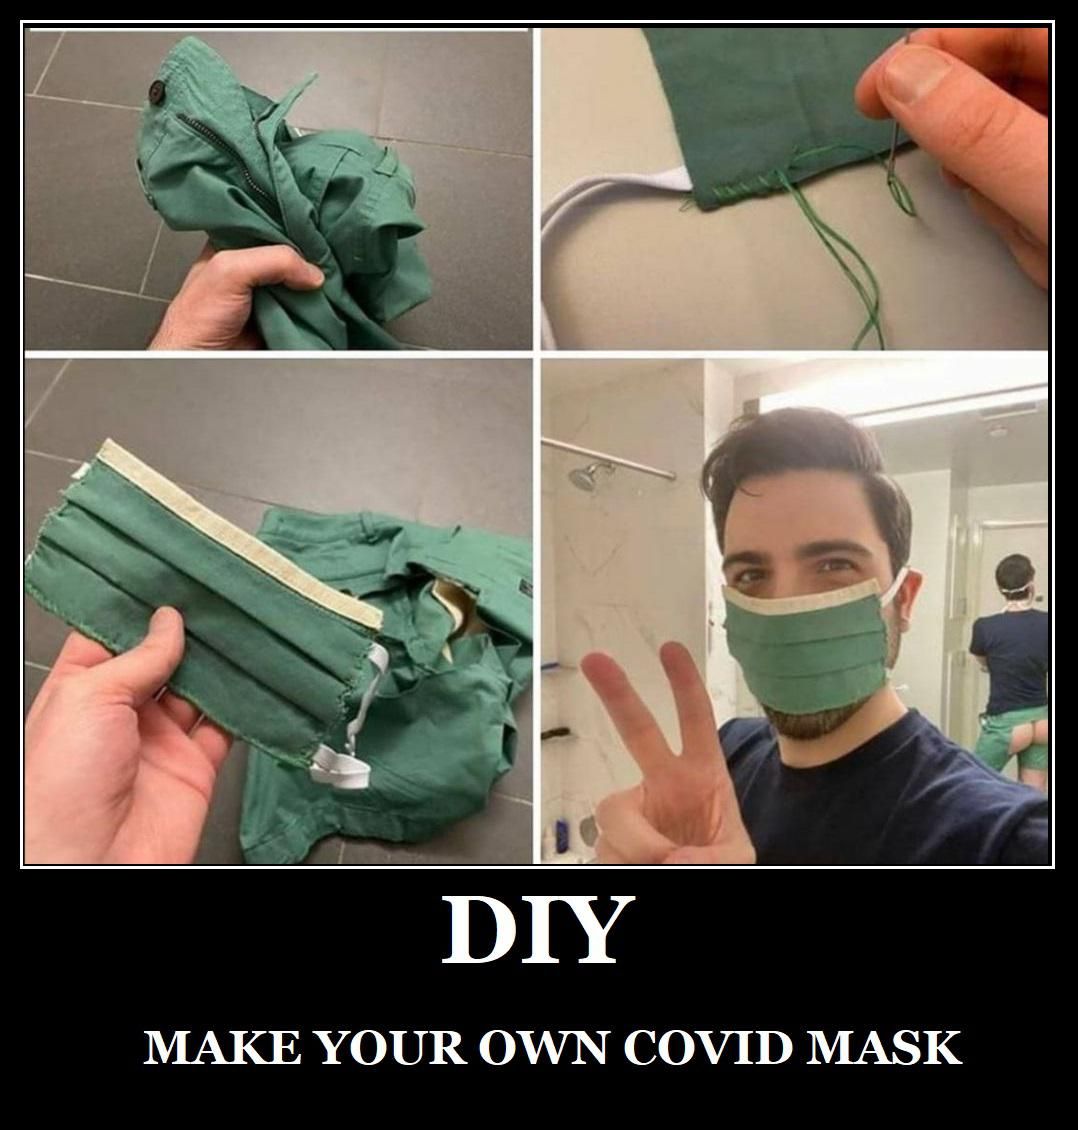 How to make a covid mask